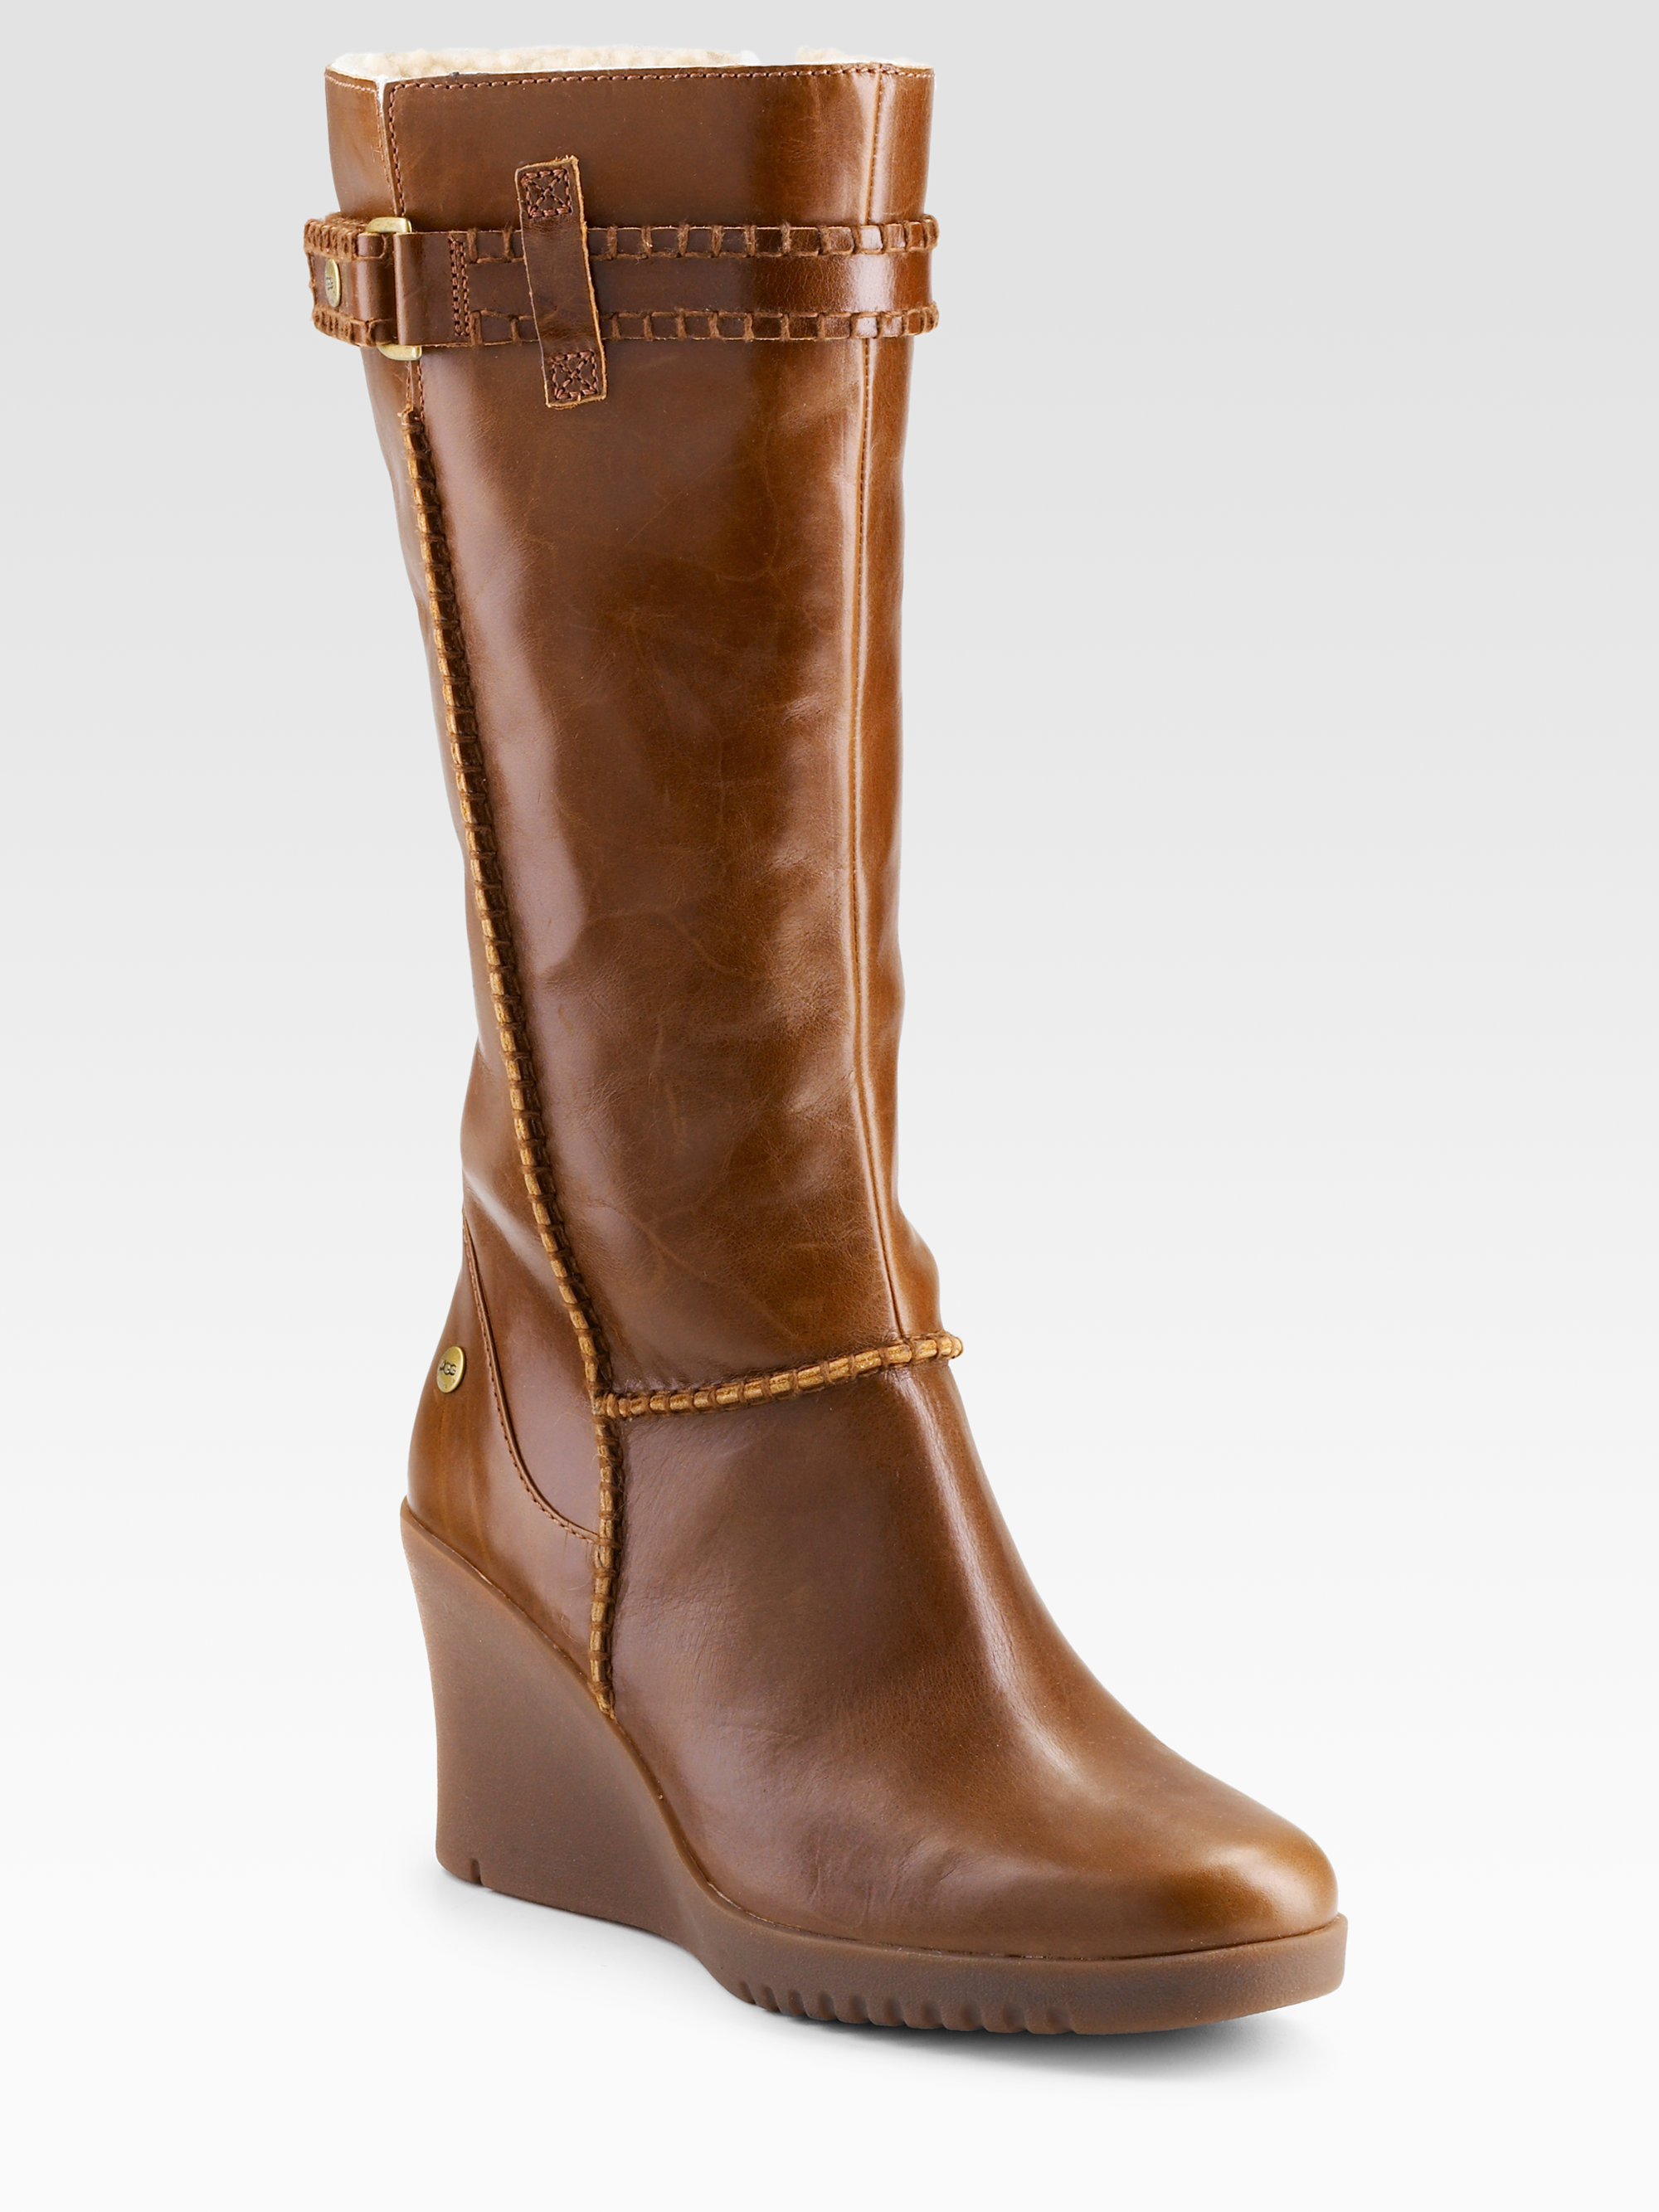 UGG Maxene Tall Wedge Shearlinglined Boots in Black (Brown) - Lyst